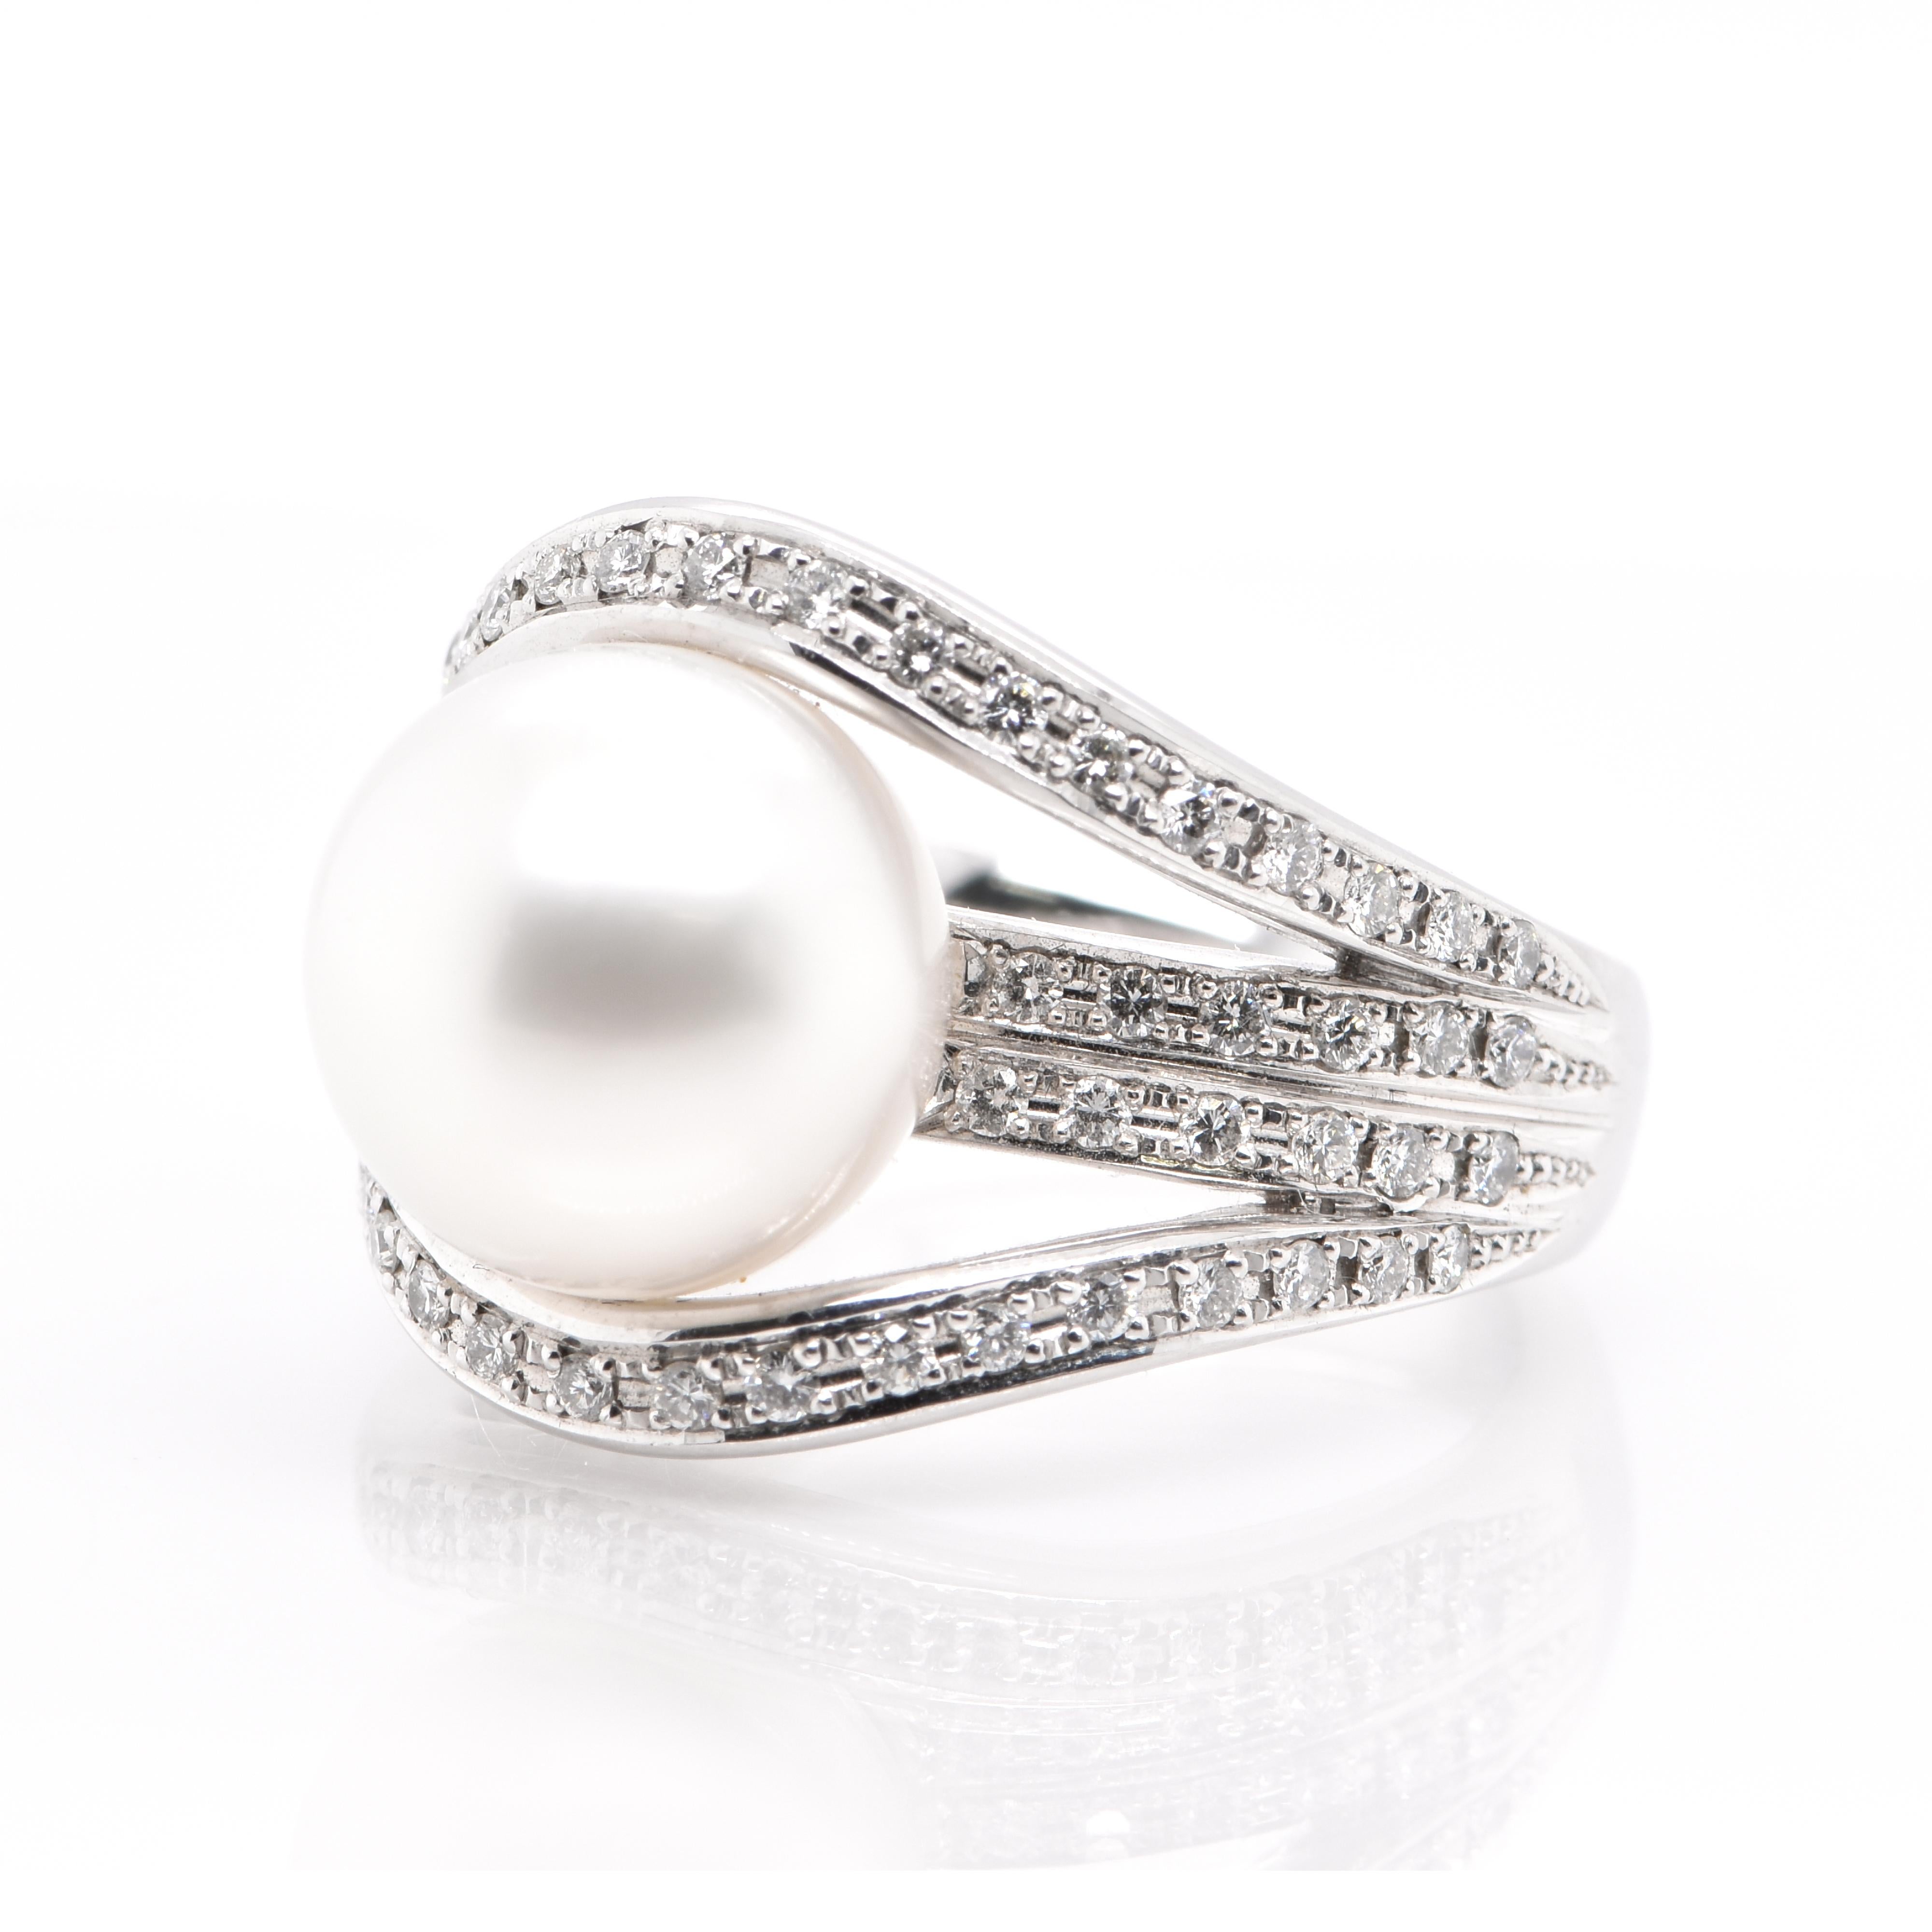 A stunning Cocktail Ring featuring a 11.80 mm, Japanese Akoya Pearl and 0.60 Carats of Diamond Accents set in Platinum. People have admired Pearls for thousands of years. It was Kokichi Mikimoto of the Mikimoto Brand that began marketing cultured